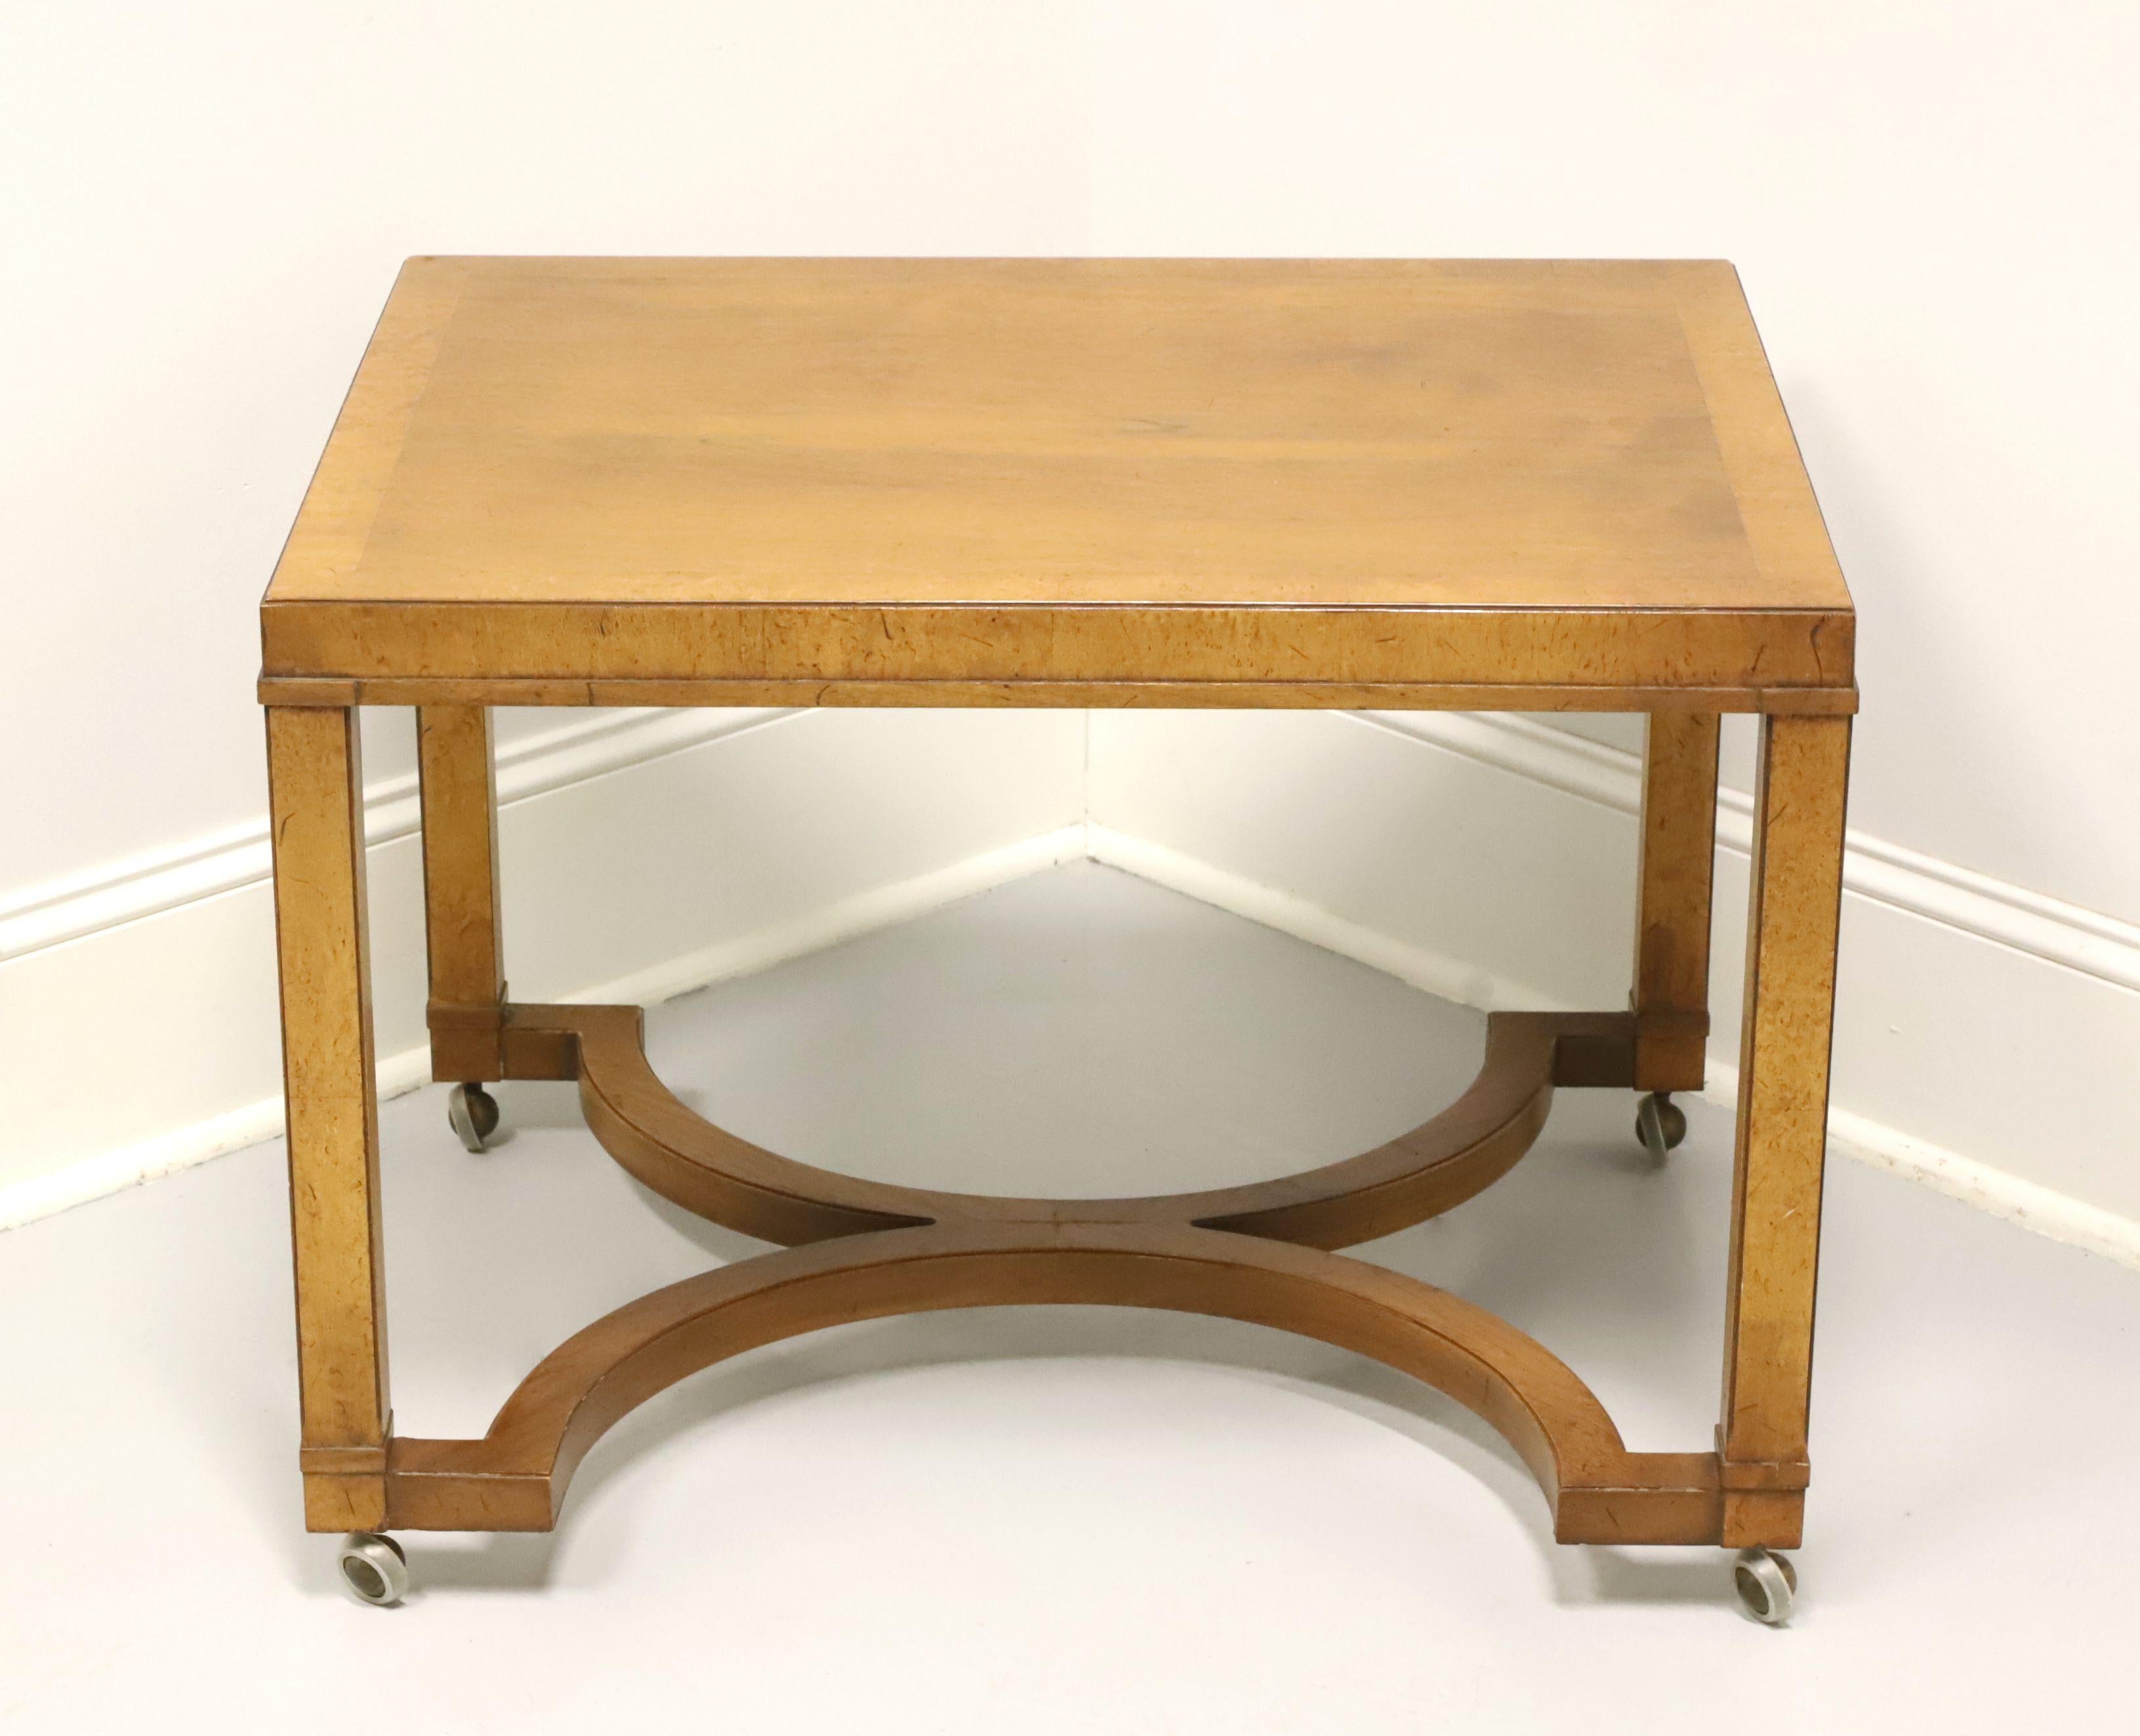 A Neoclassical style rectangular side table by Tomlinson Furniture. Walnut with burlwood banding to top, slightly distressed finish, straight square legs affixed to 